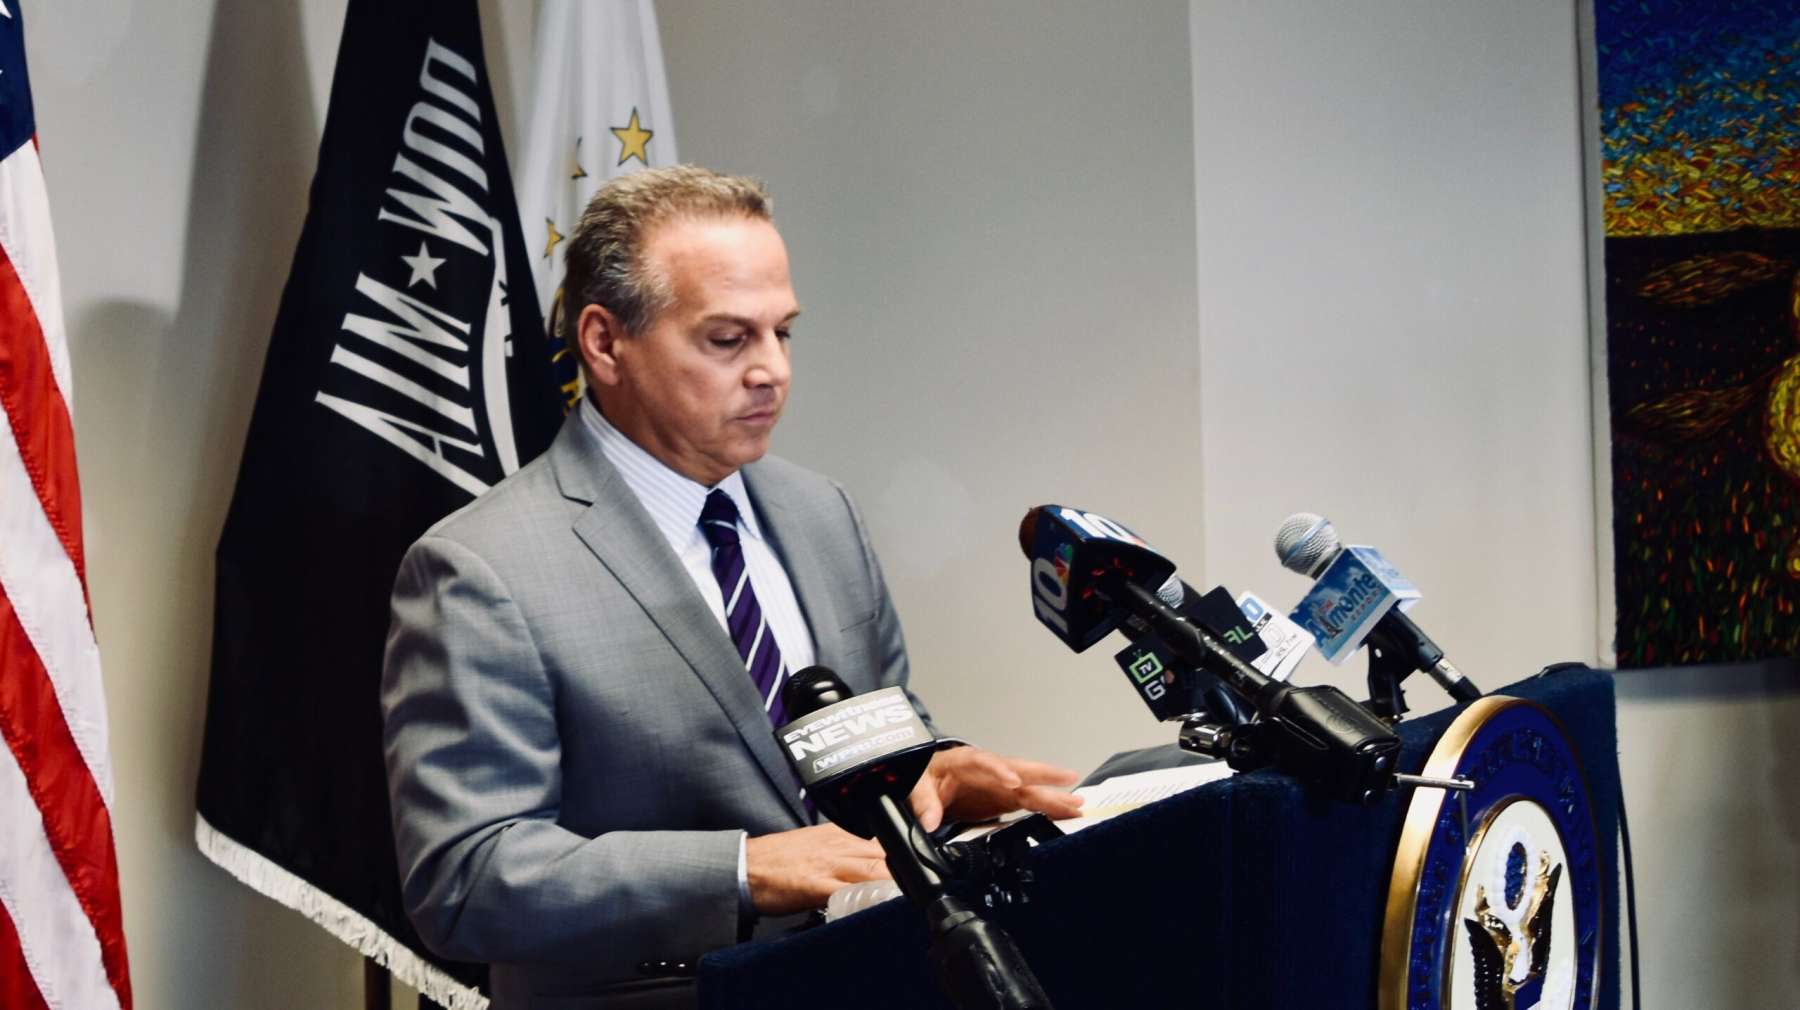 Rhode Island News: Cicilline: The Mueller Report ‘does not exonerate the President’